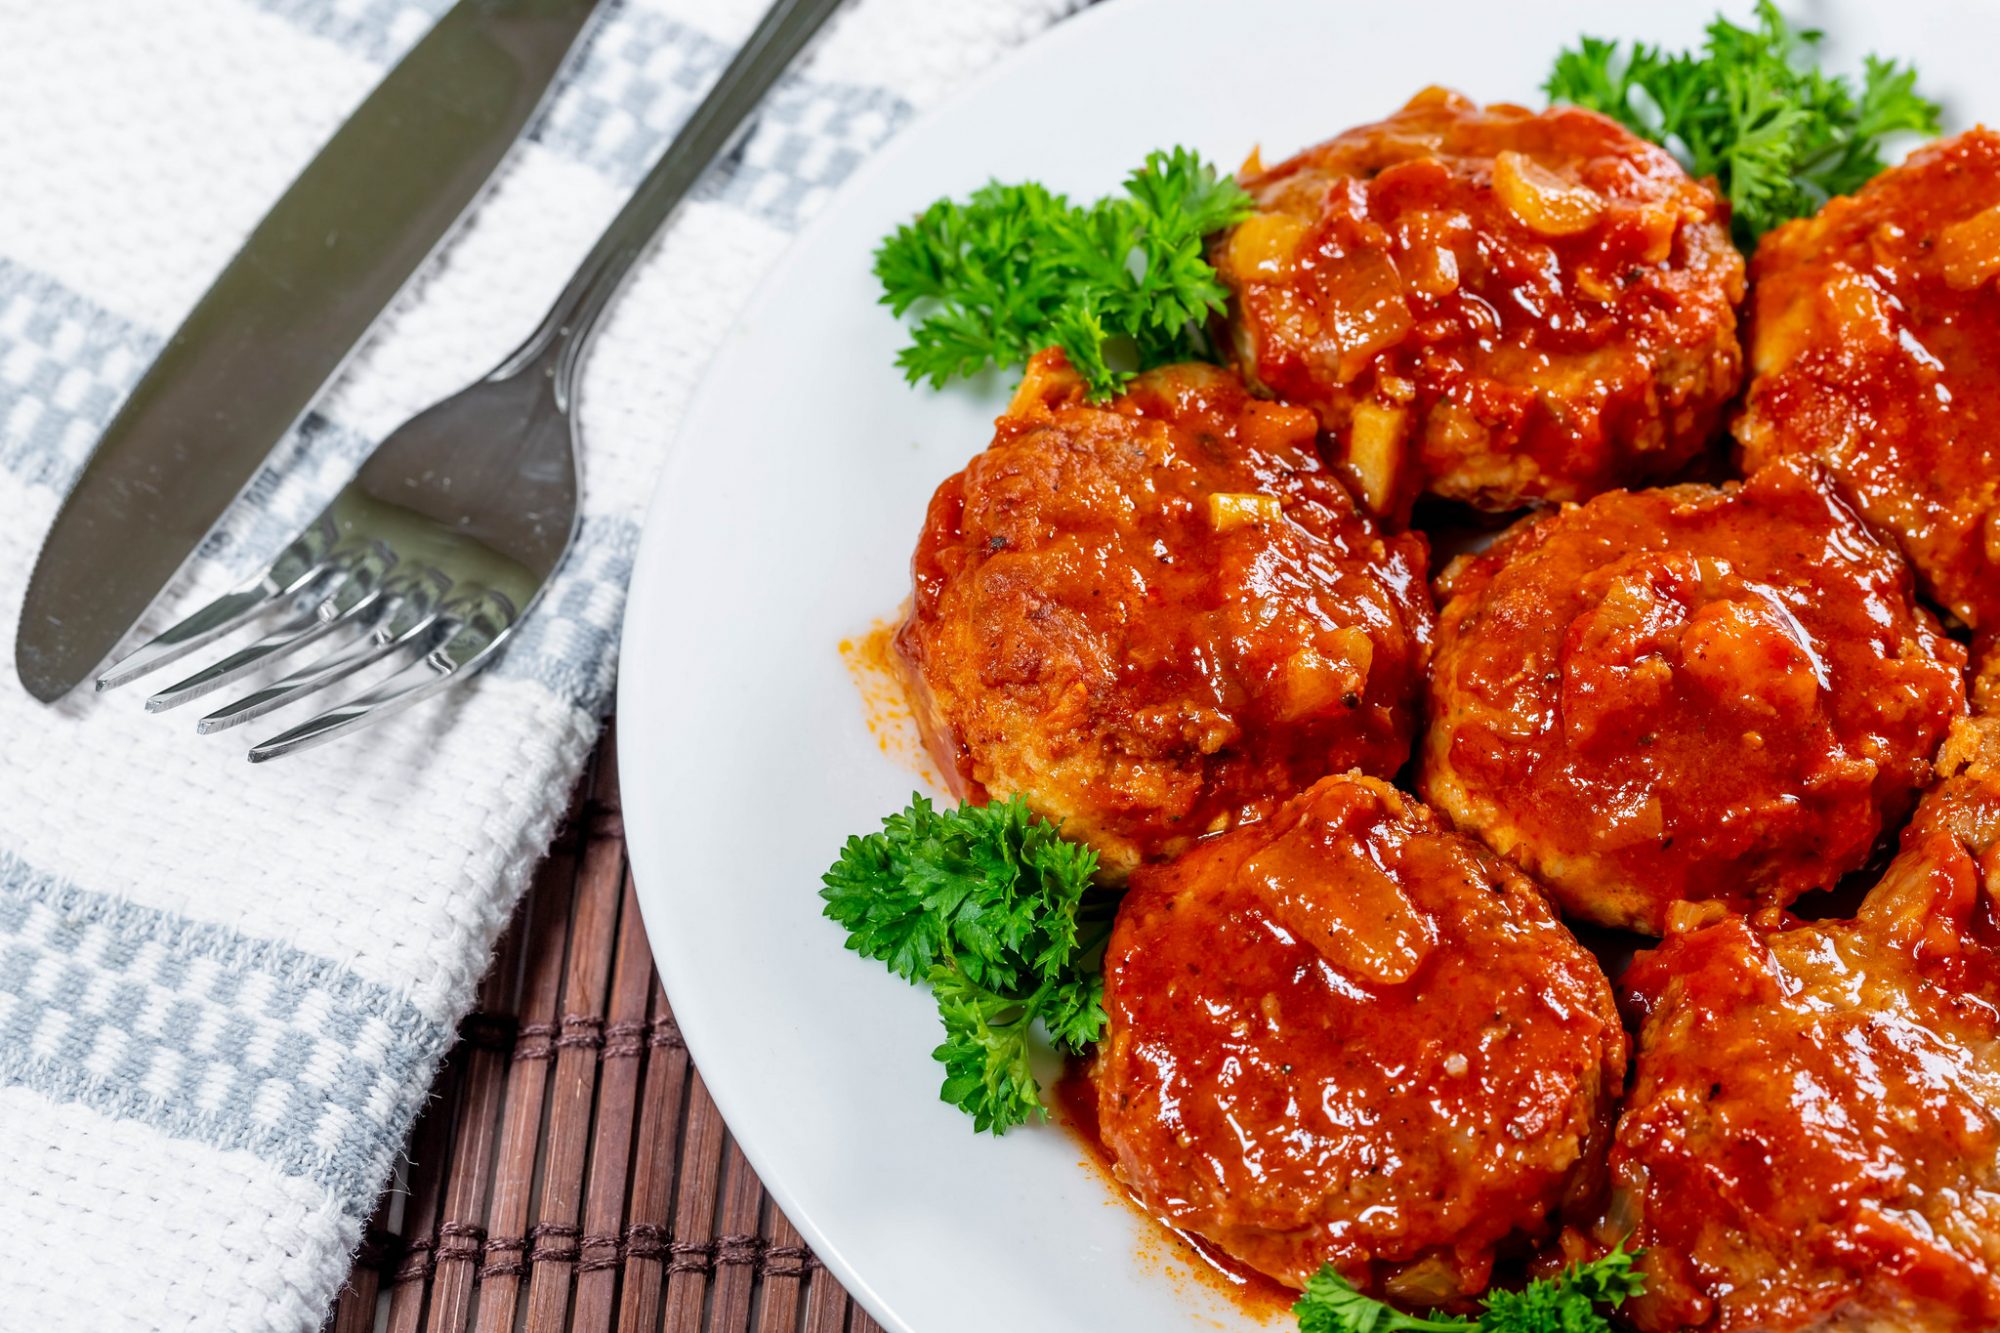 Beef meatball, carrots and tomato sauce